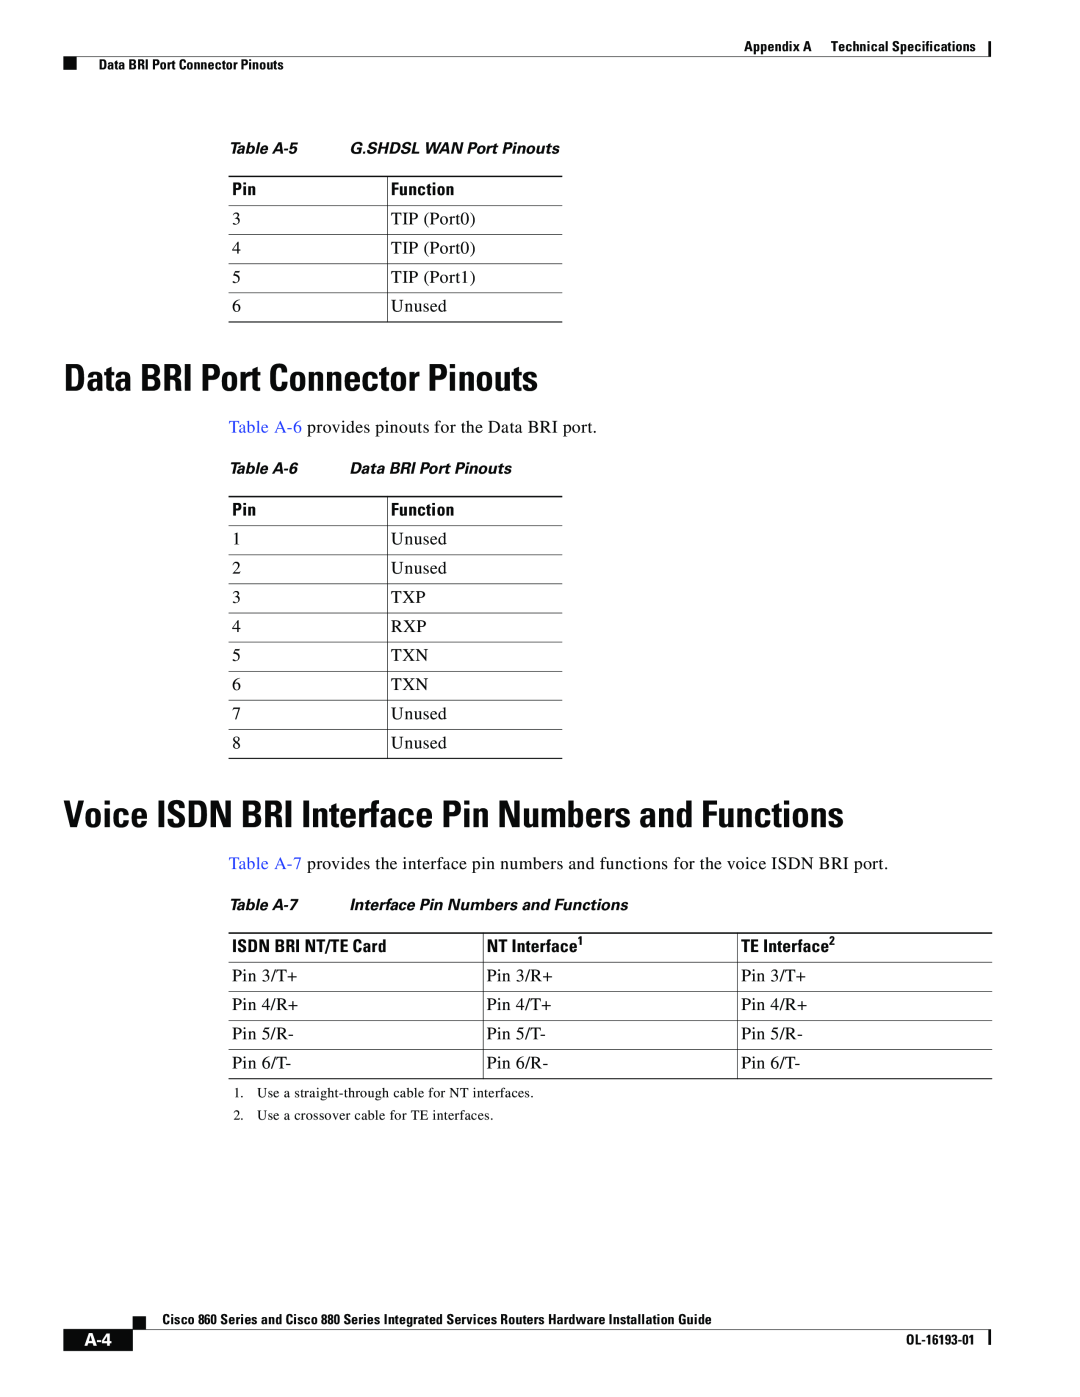 Cisco Systems C892FSPK9, HIG880, 861 Data BRI Port Connector Pinouts, Voice ISDN BRI Interface Pin Numbers and Functions 